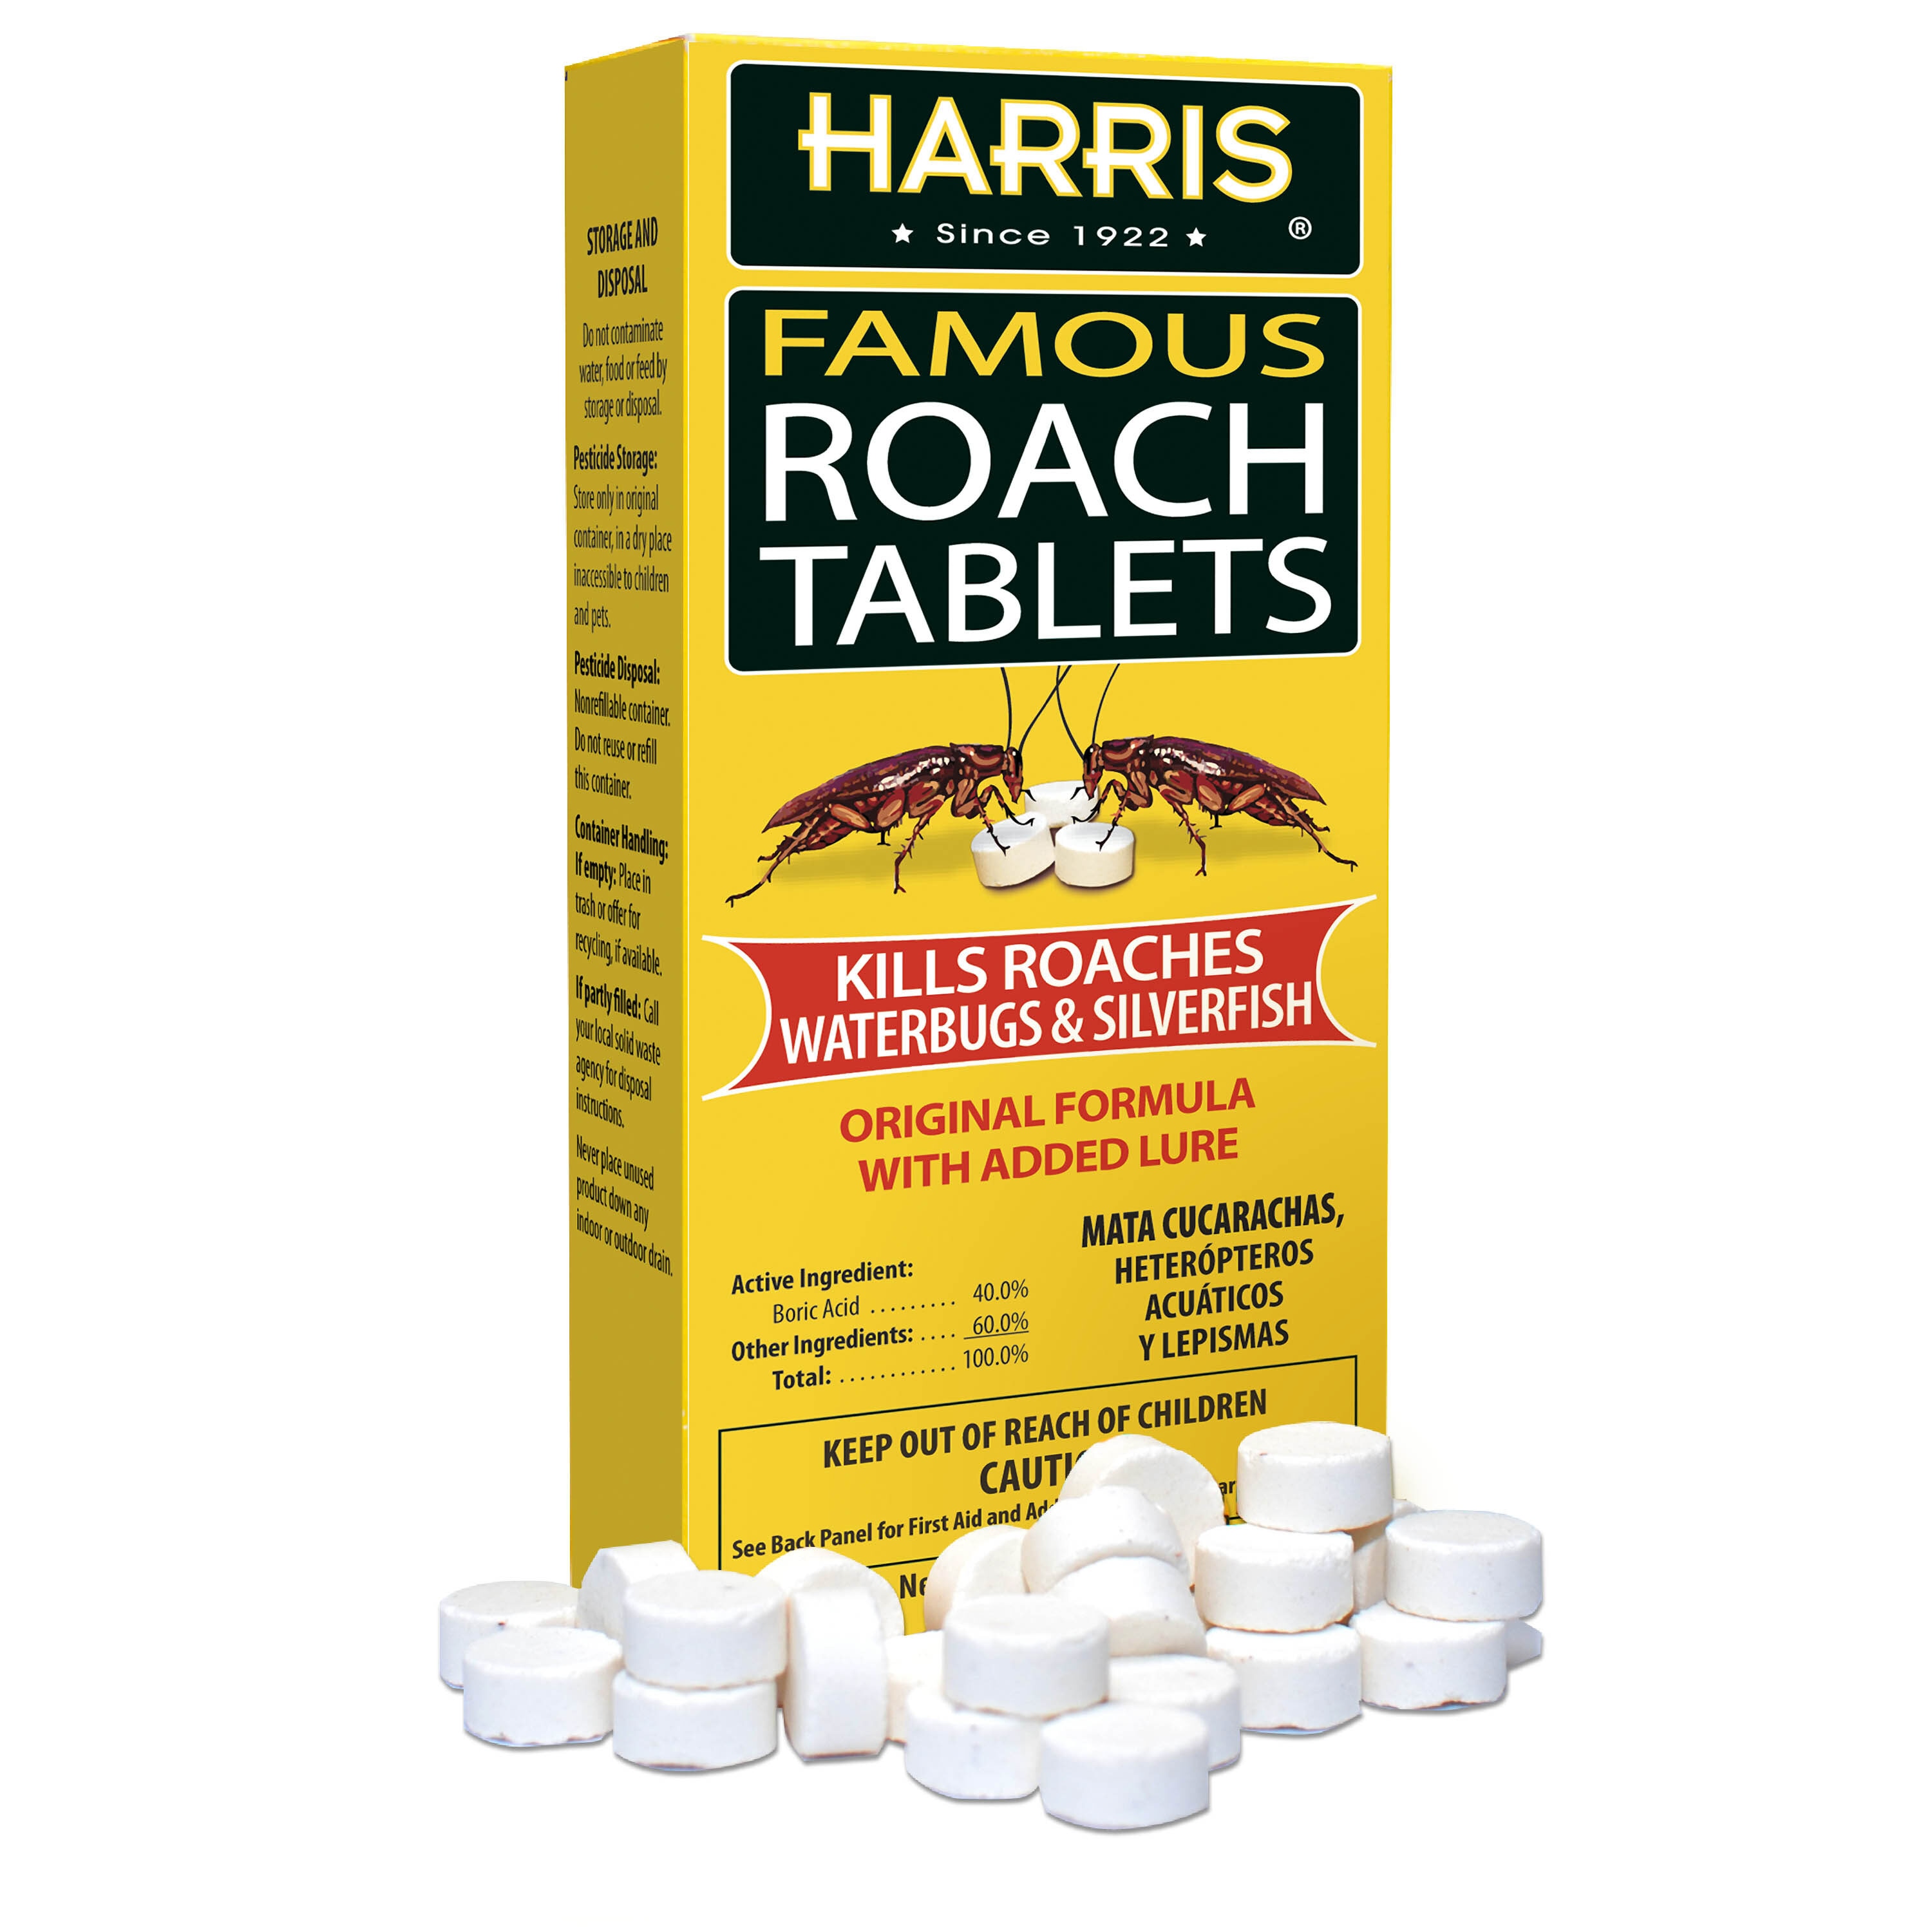 Harris 4 lbs. Dry Up Rat and Mouse Killer Pellets (4 oz. 16-Pack)